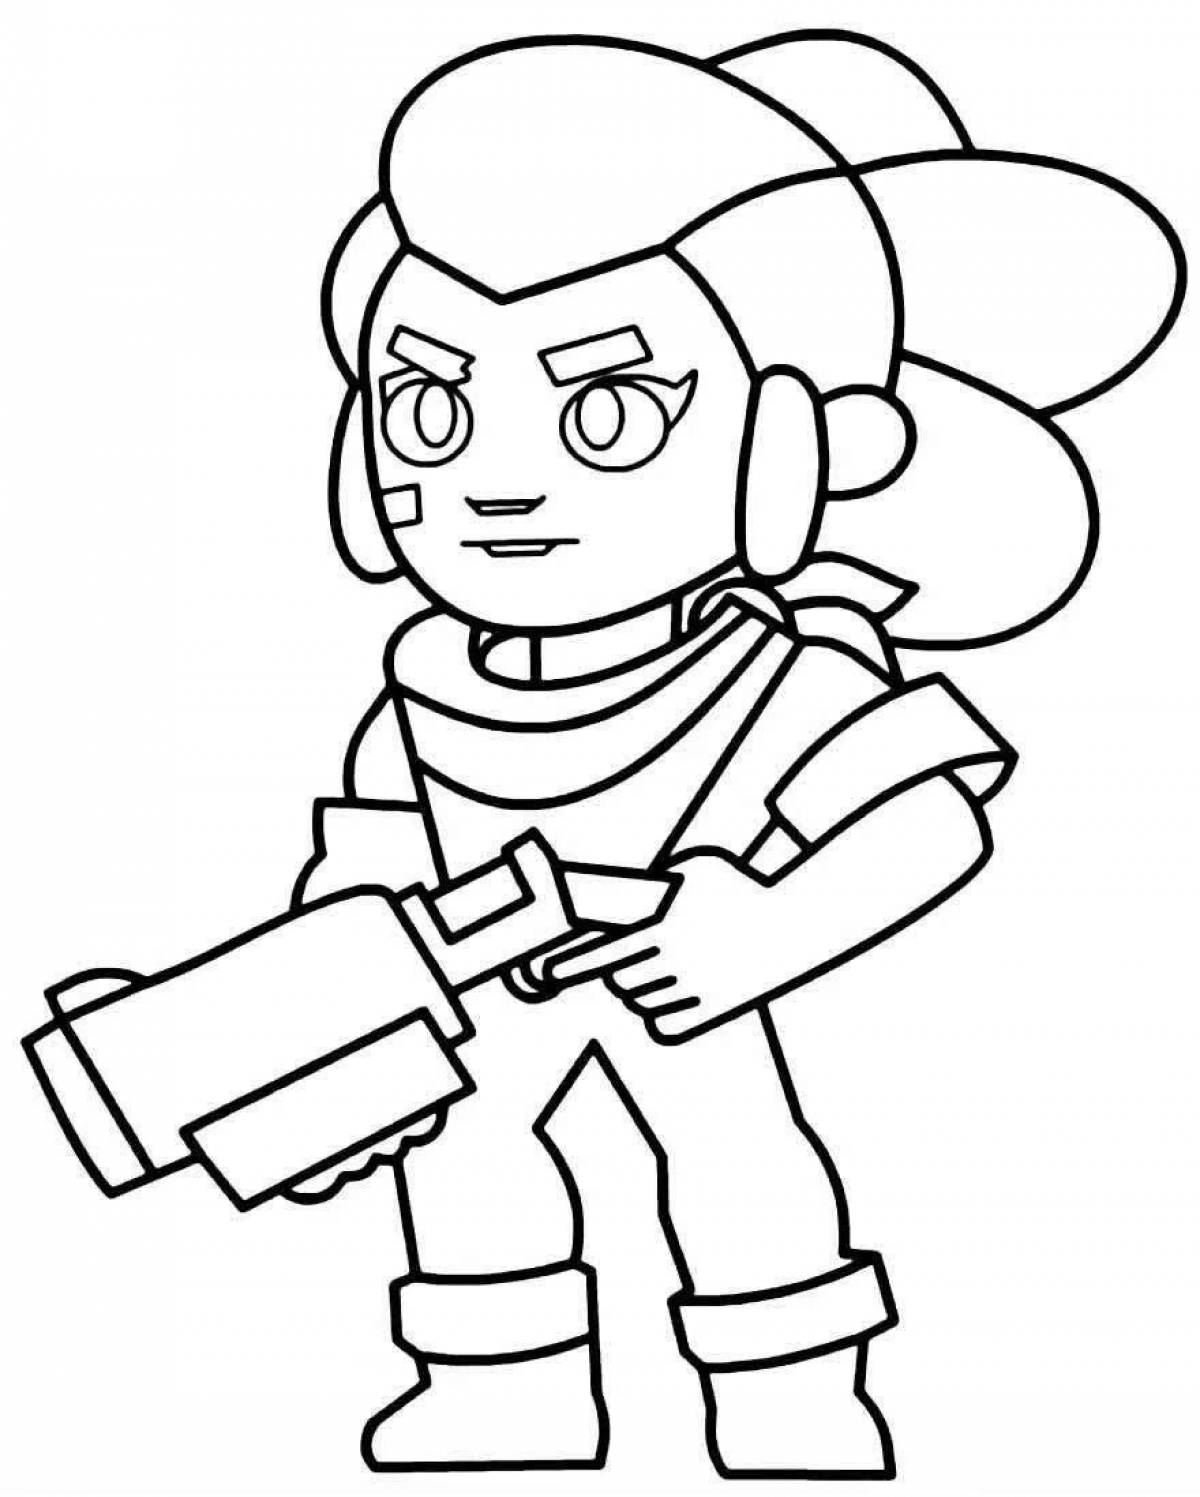 Cute Piper coloring page